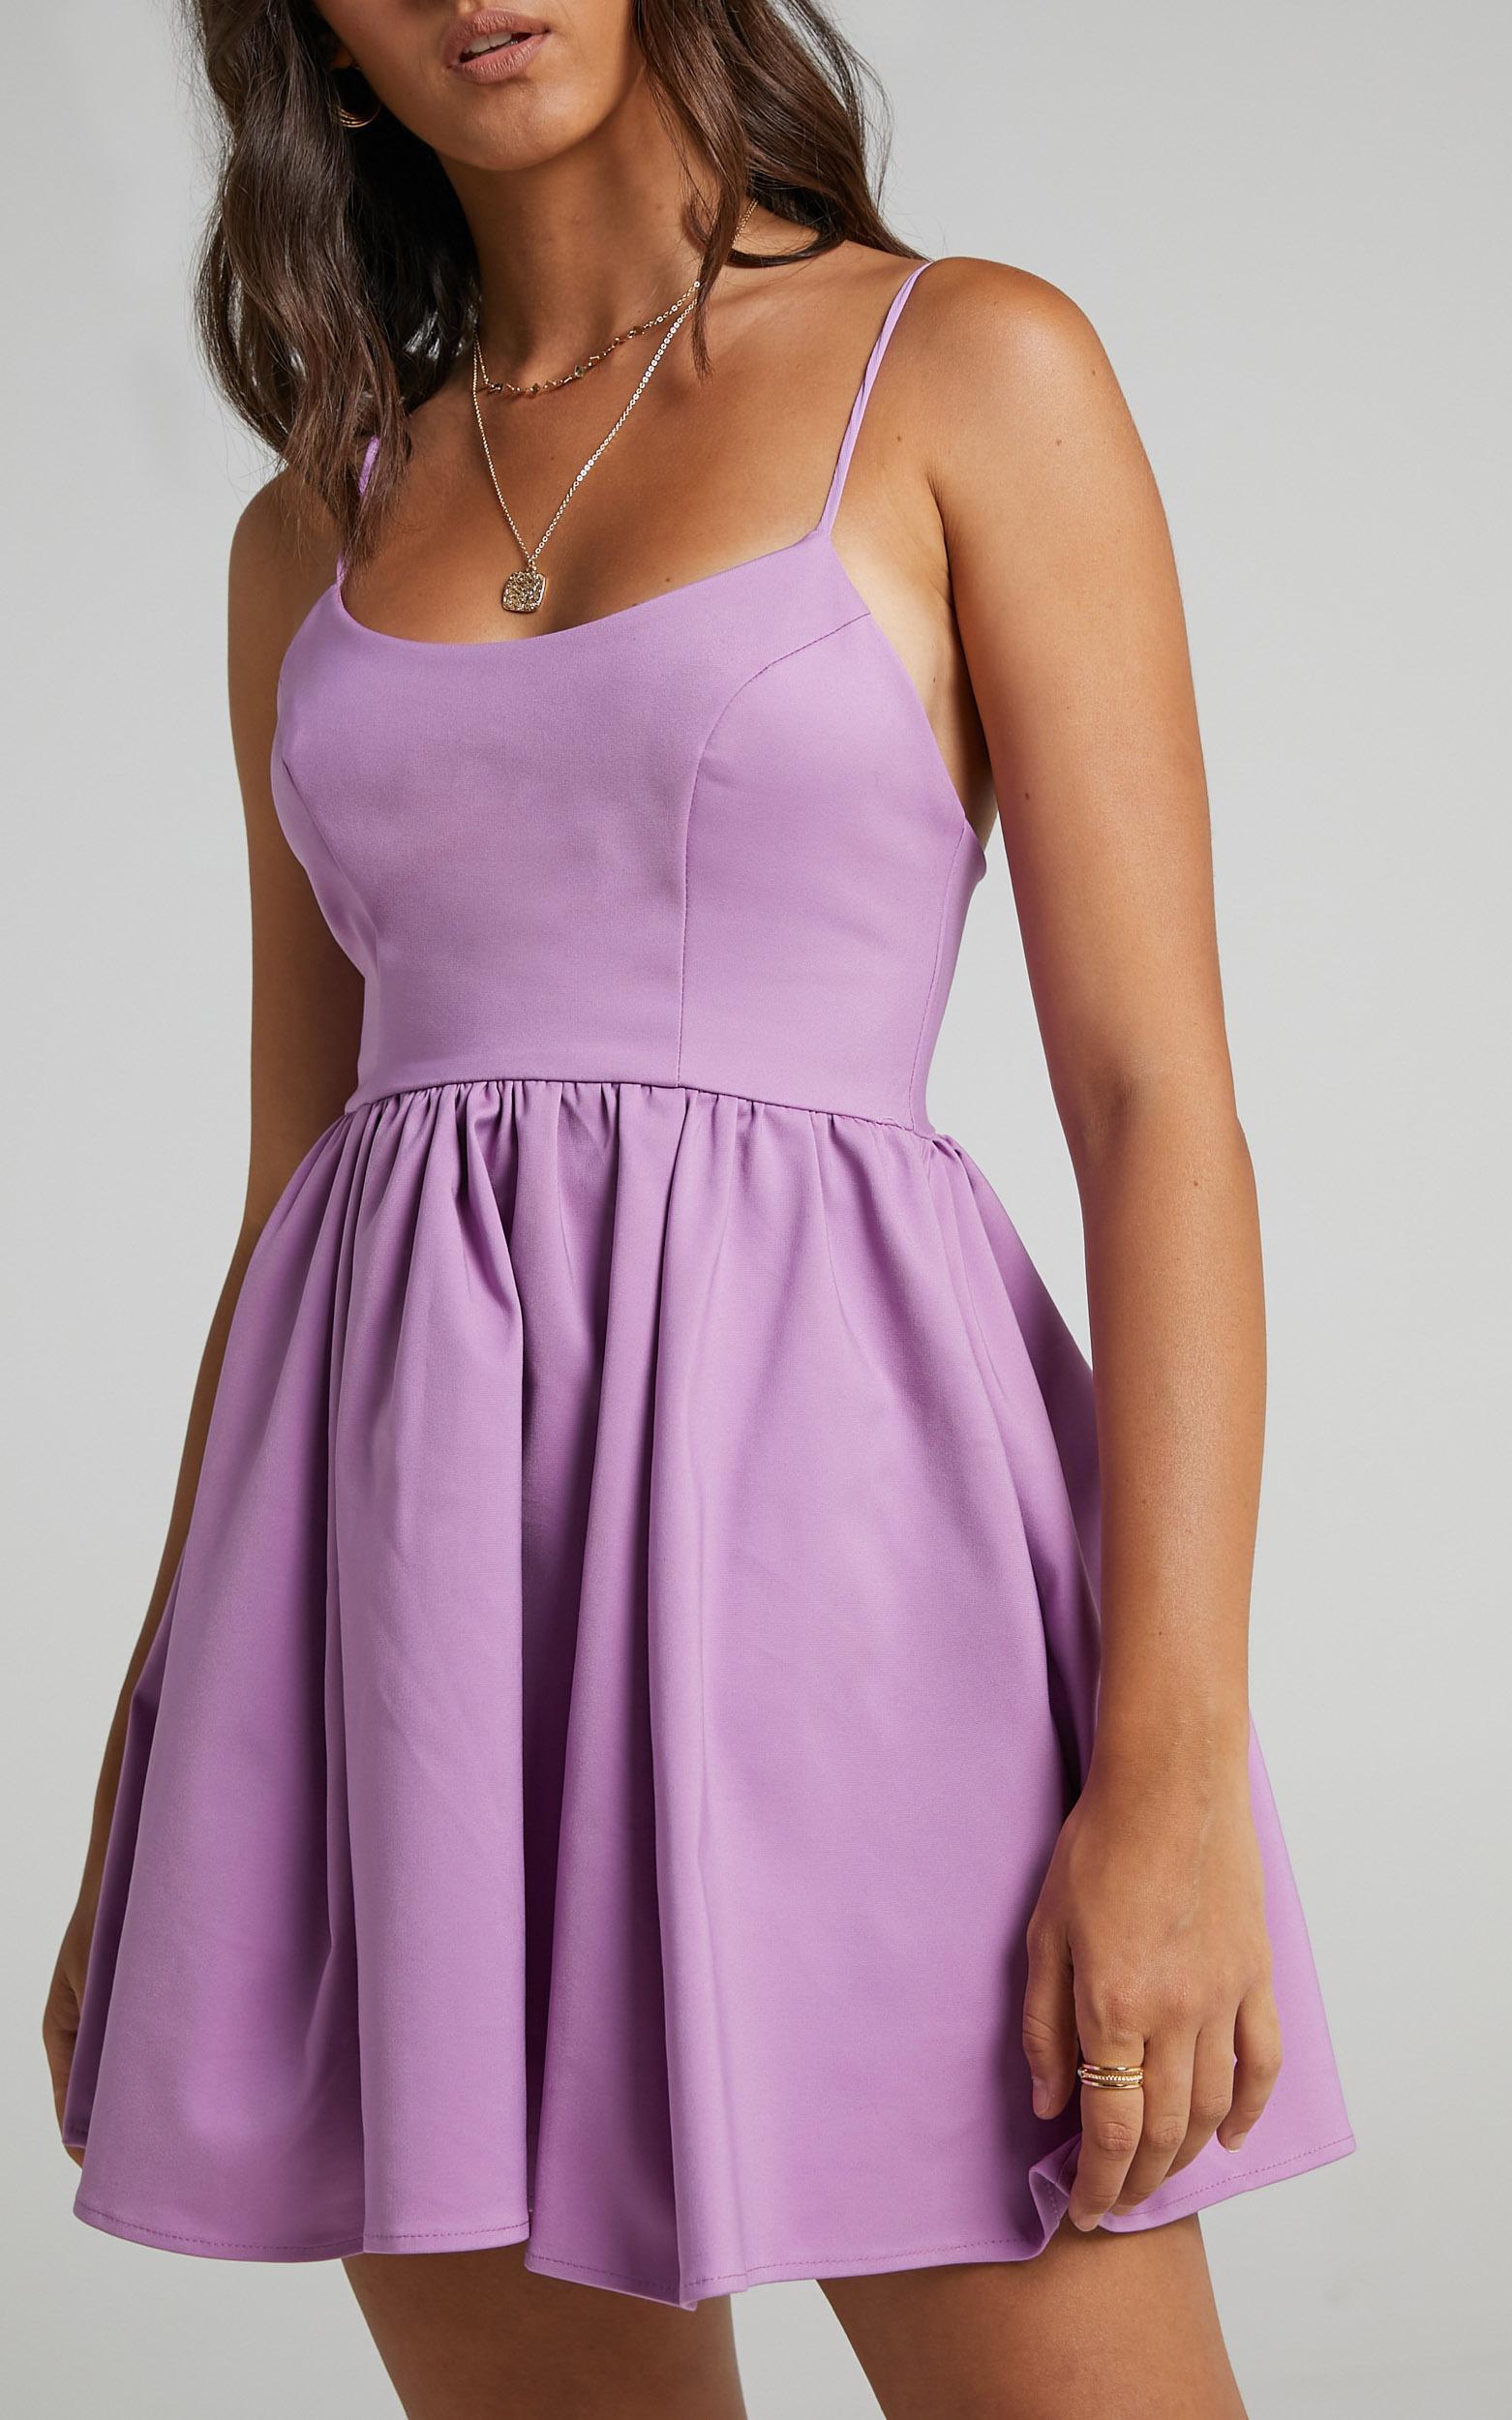 You Got Nothing To Prove Dress in Lilac | Showpo